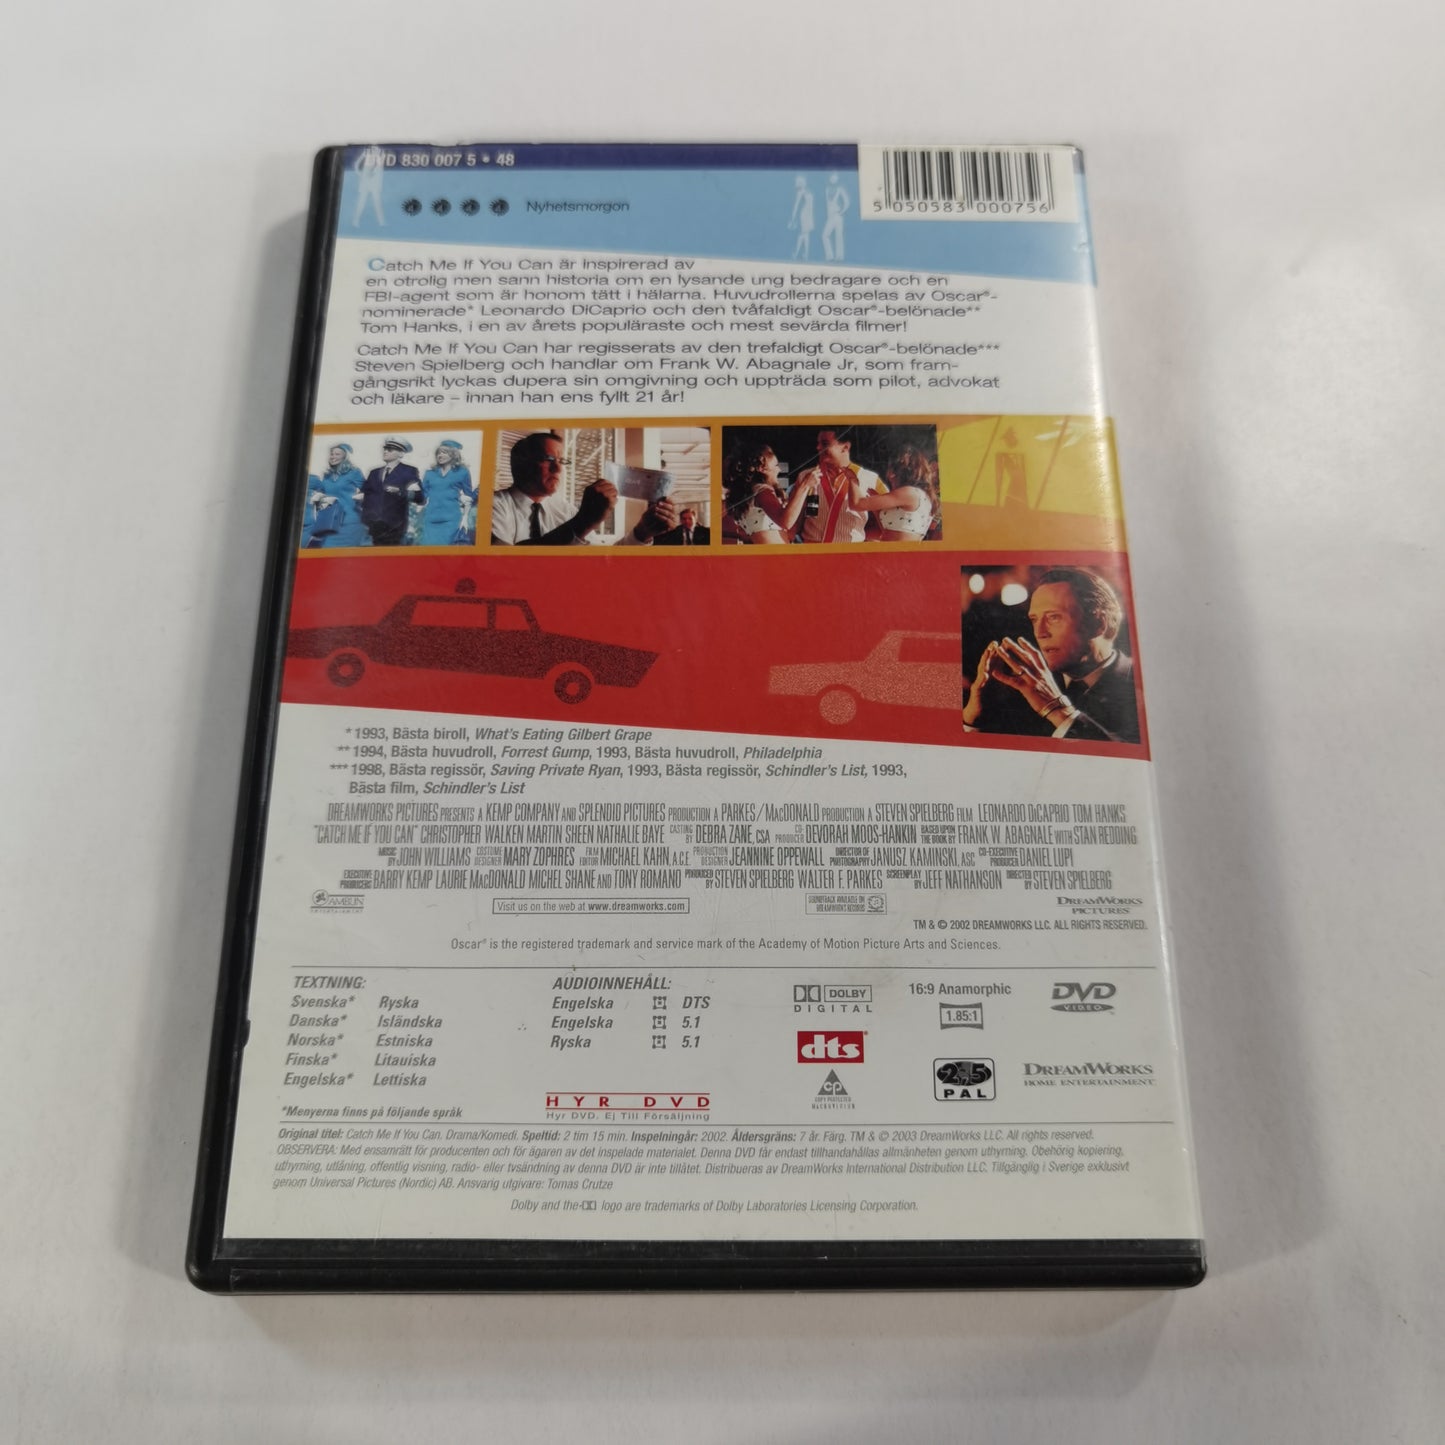 Catch Me If You Can (2002) - DVD SE 2003 RC